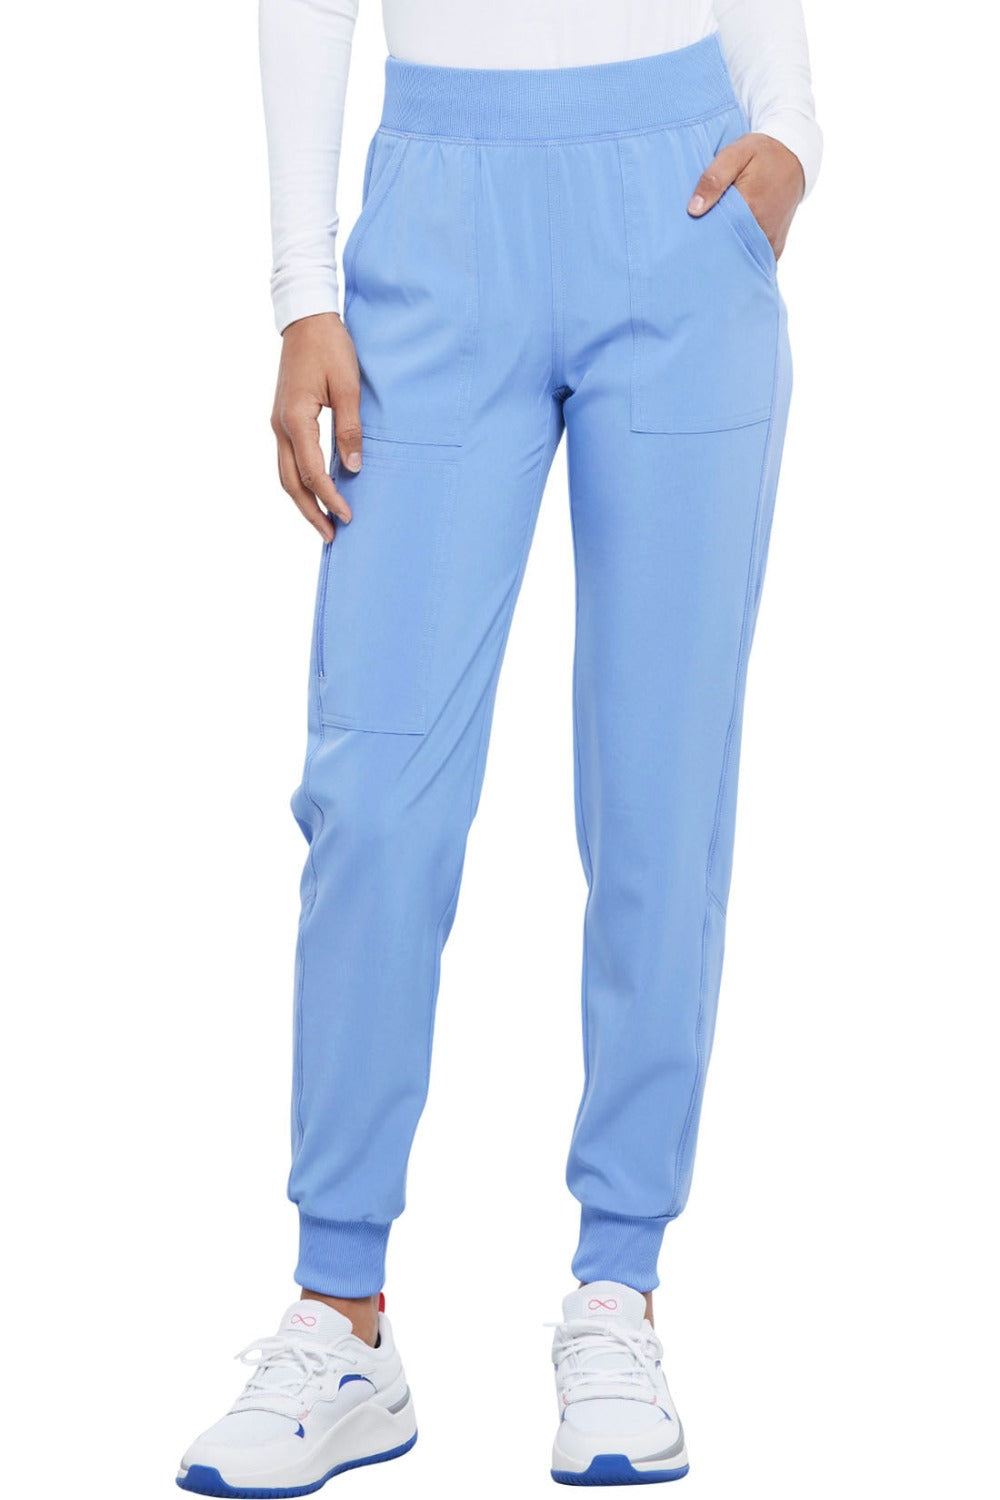 Cherokee Allura Scrub Pant Pull On Jogger in Ciel at Parker's Clothing and Shoes.